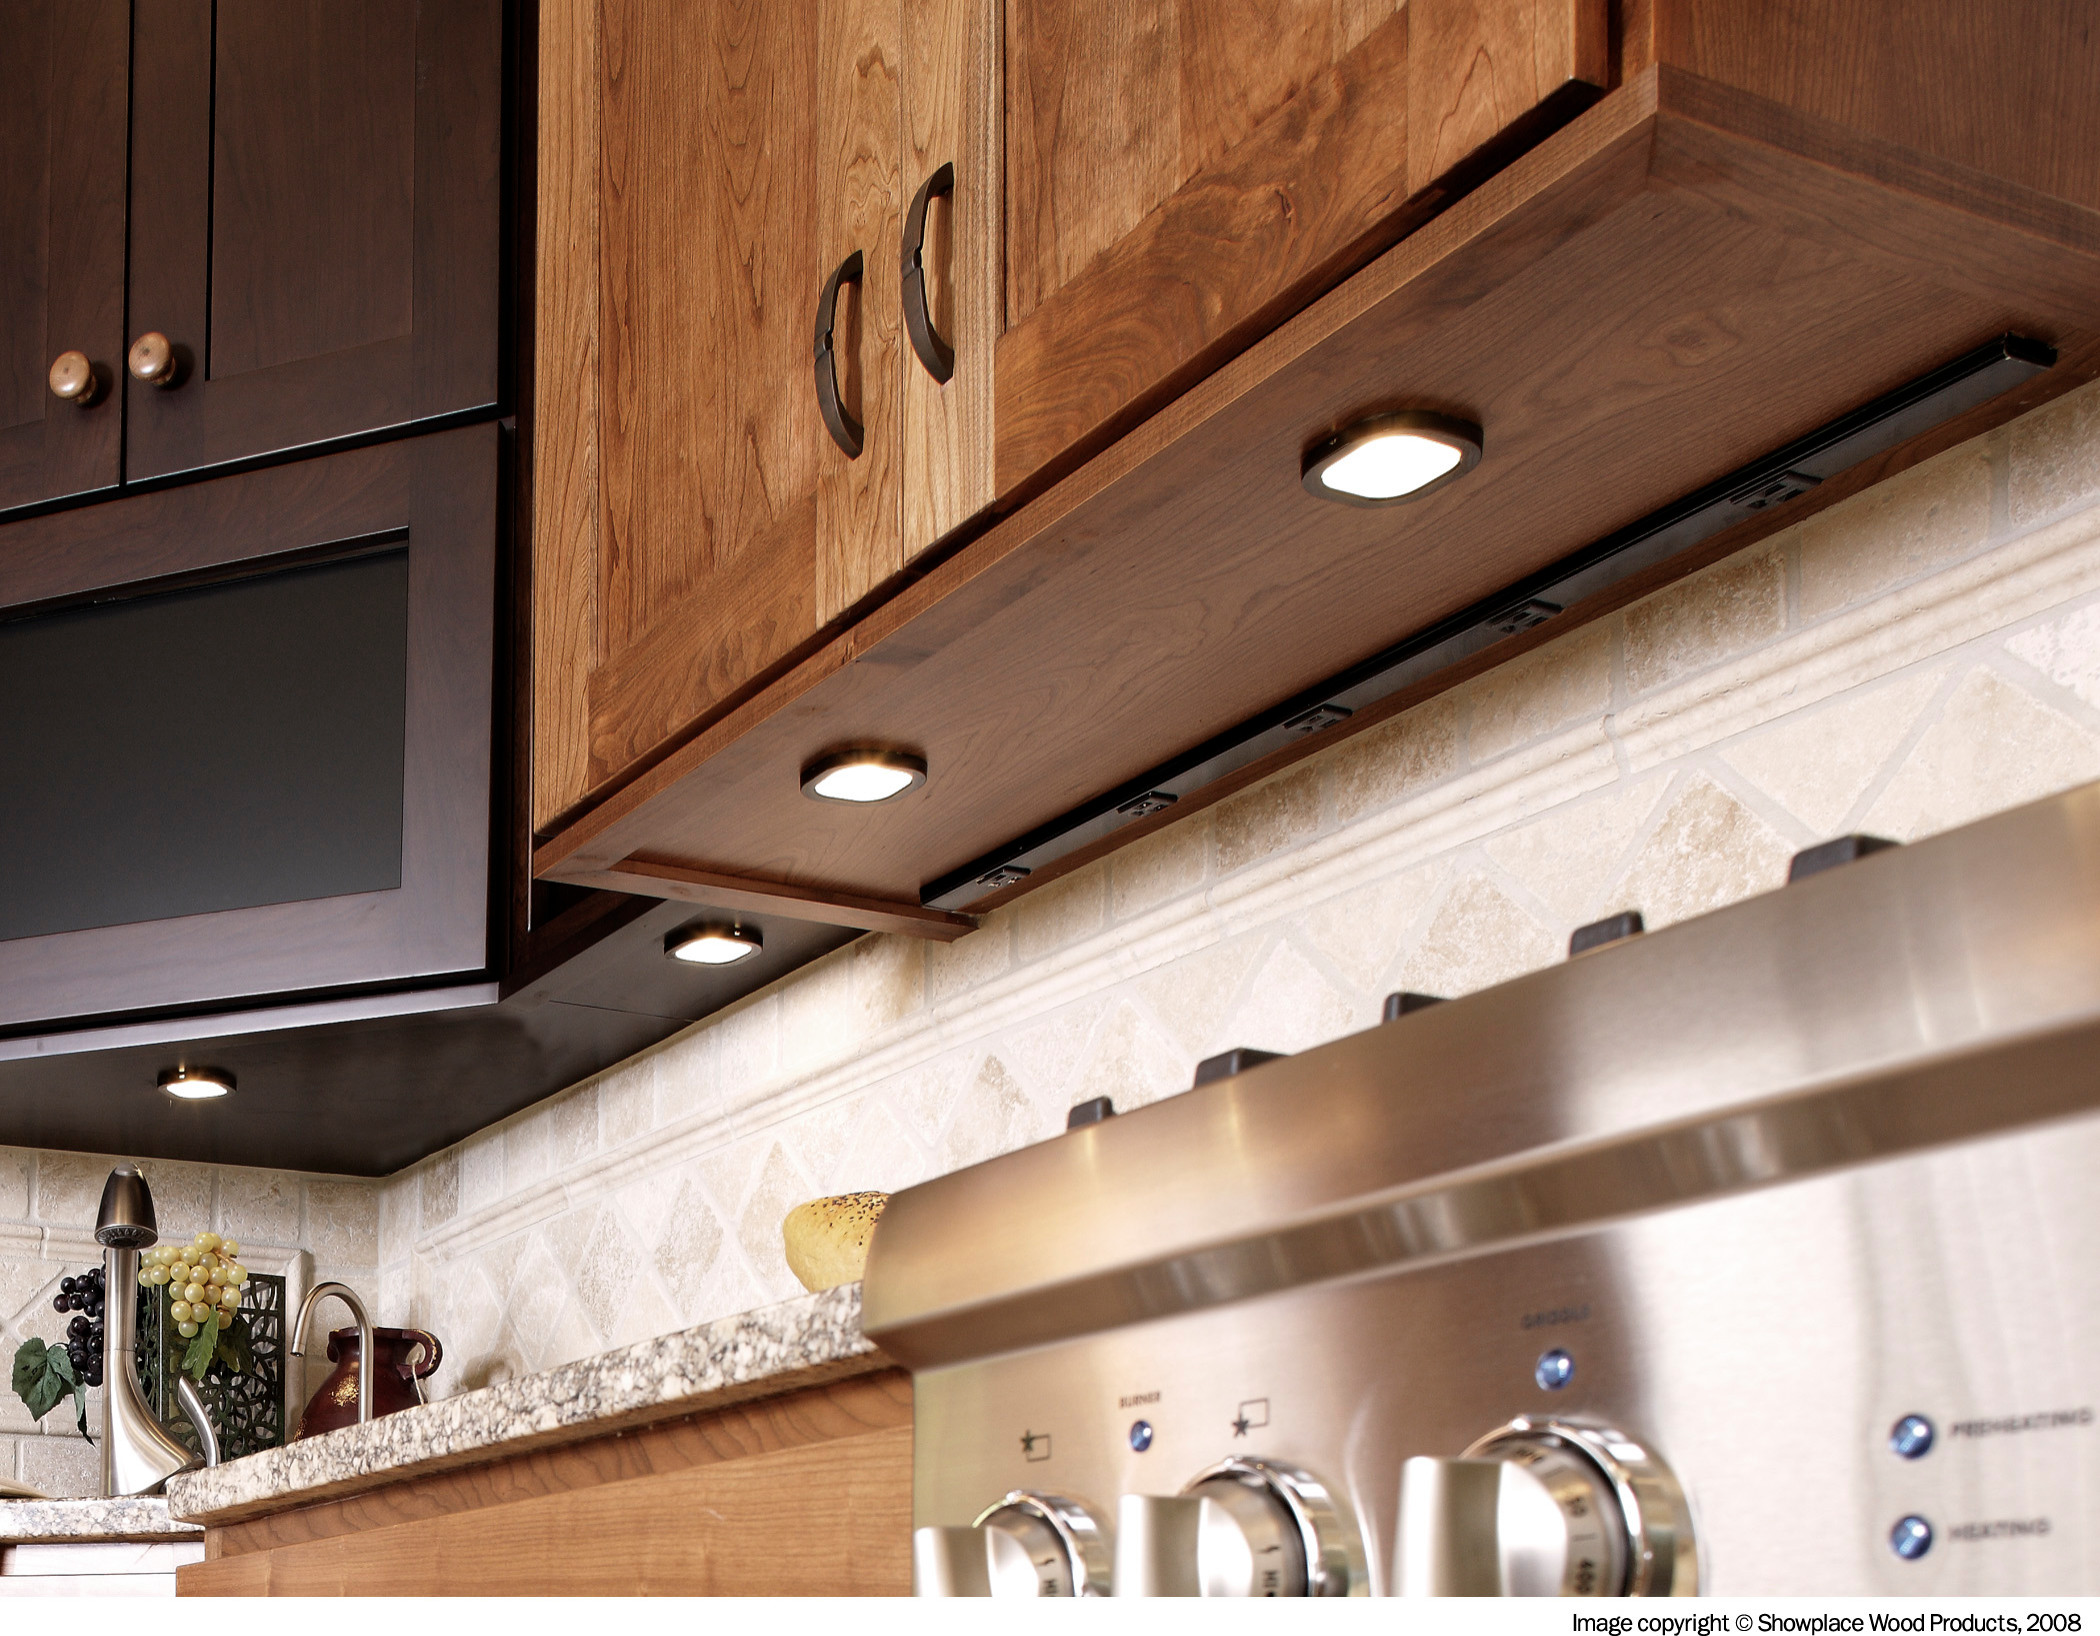 Undercabinet Outlet Strips - Photos & Ideas | Houzz